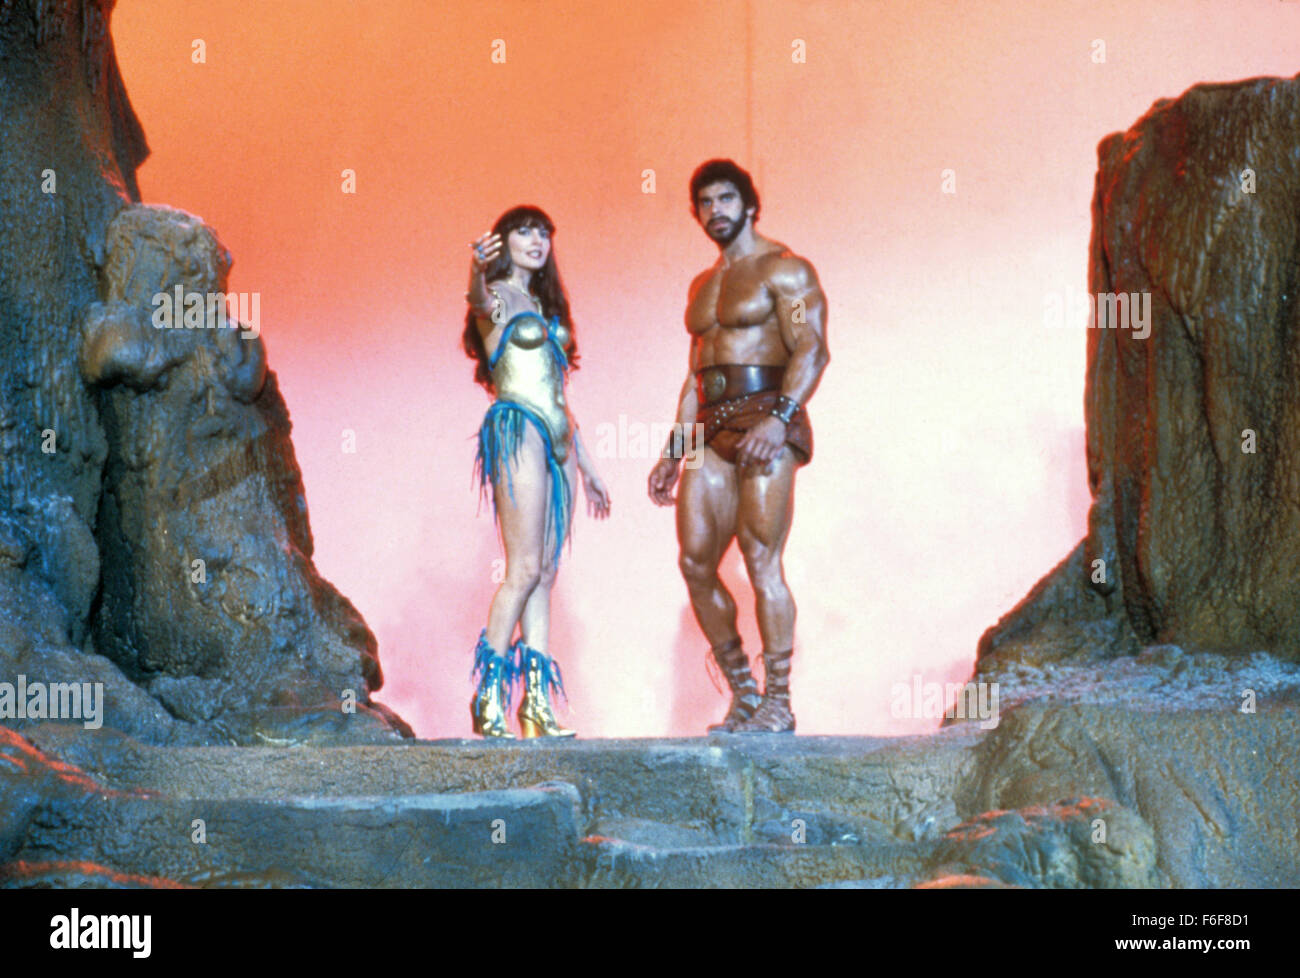 RELEASE DATE: August 12, 1983   MOVIE TITLE: Hercules   DIRECTOR: Luigi Cozzi  STUDIO: MGM   PLOT: The movie tells the story of the Greek mythological figure Hercules, updated in this 80's version   PICTURED: SYBIL DANNING as Ariadne and LOU FERRIGNO as Hercules  (Credit Image: c MGM/Entertainment Pictures) Stock Photo